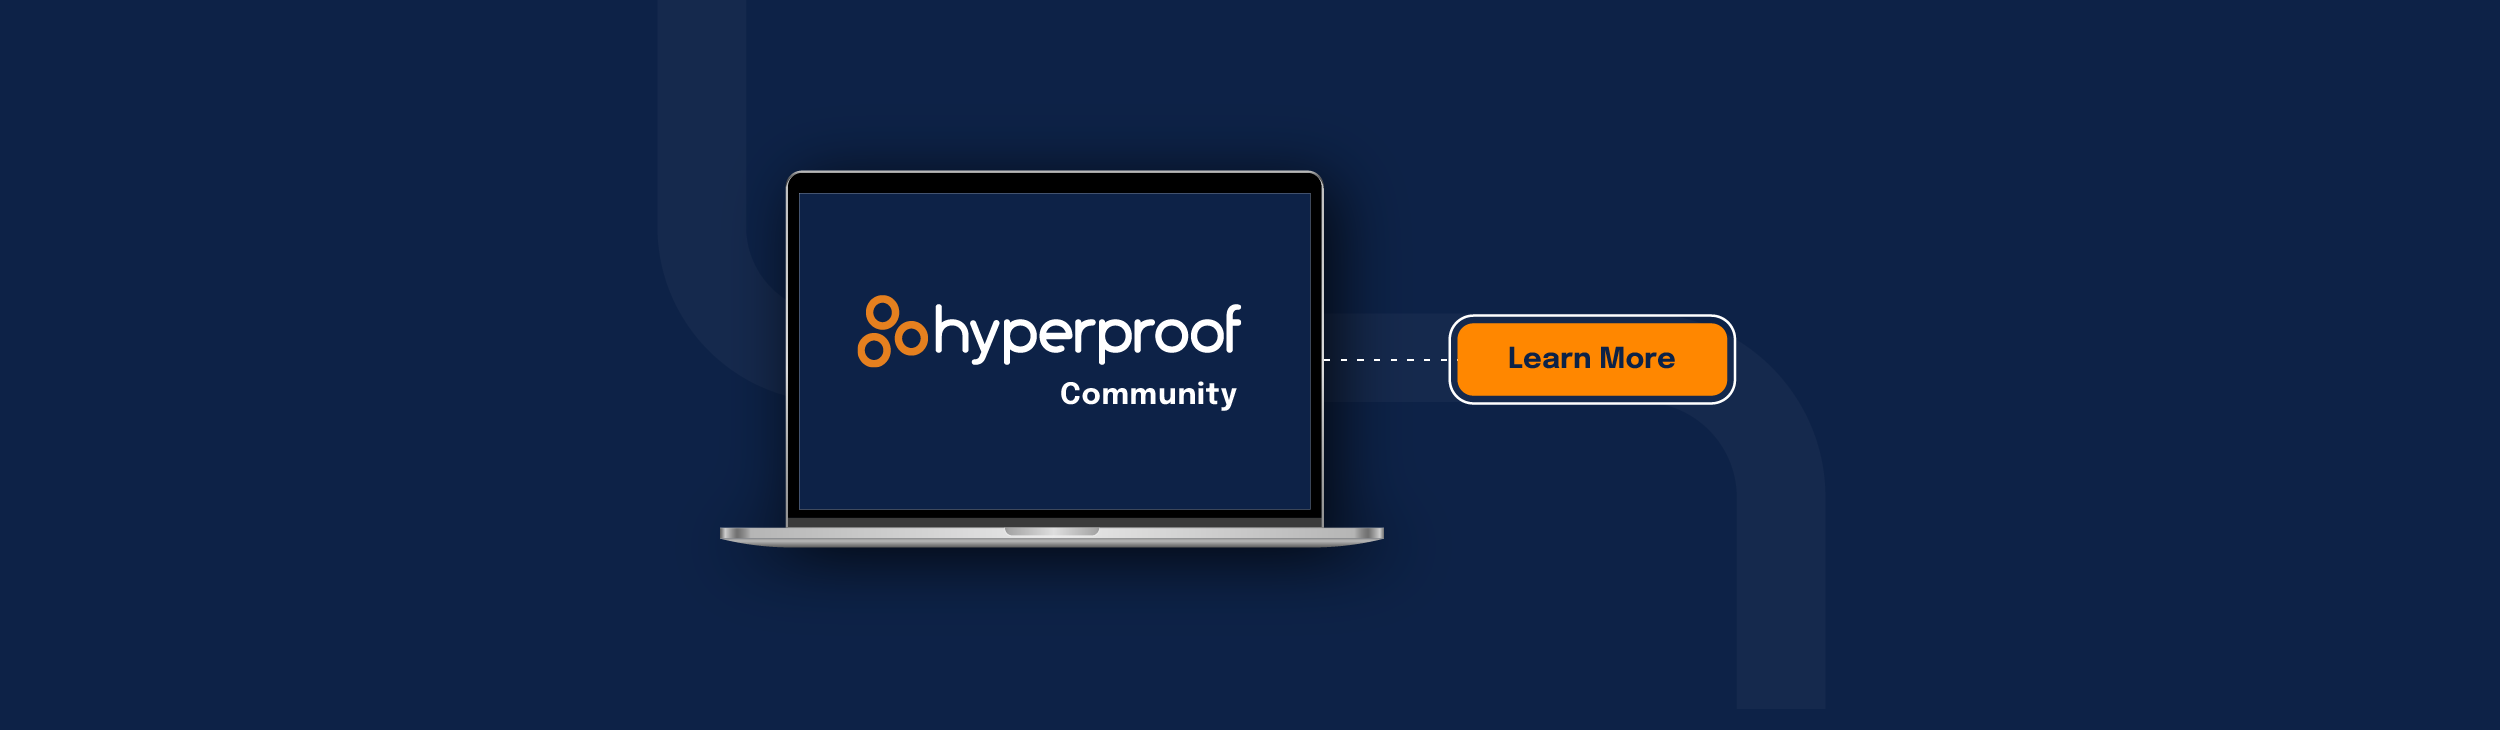 Vector image to represent a user learning more about the Hyperproof Community